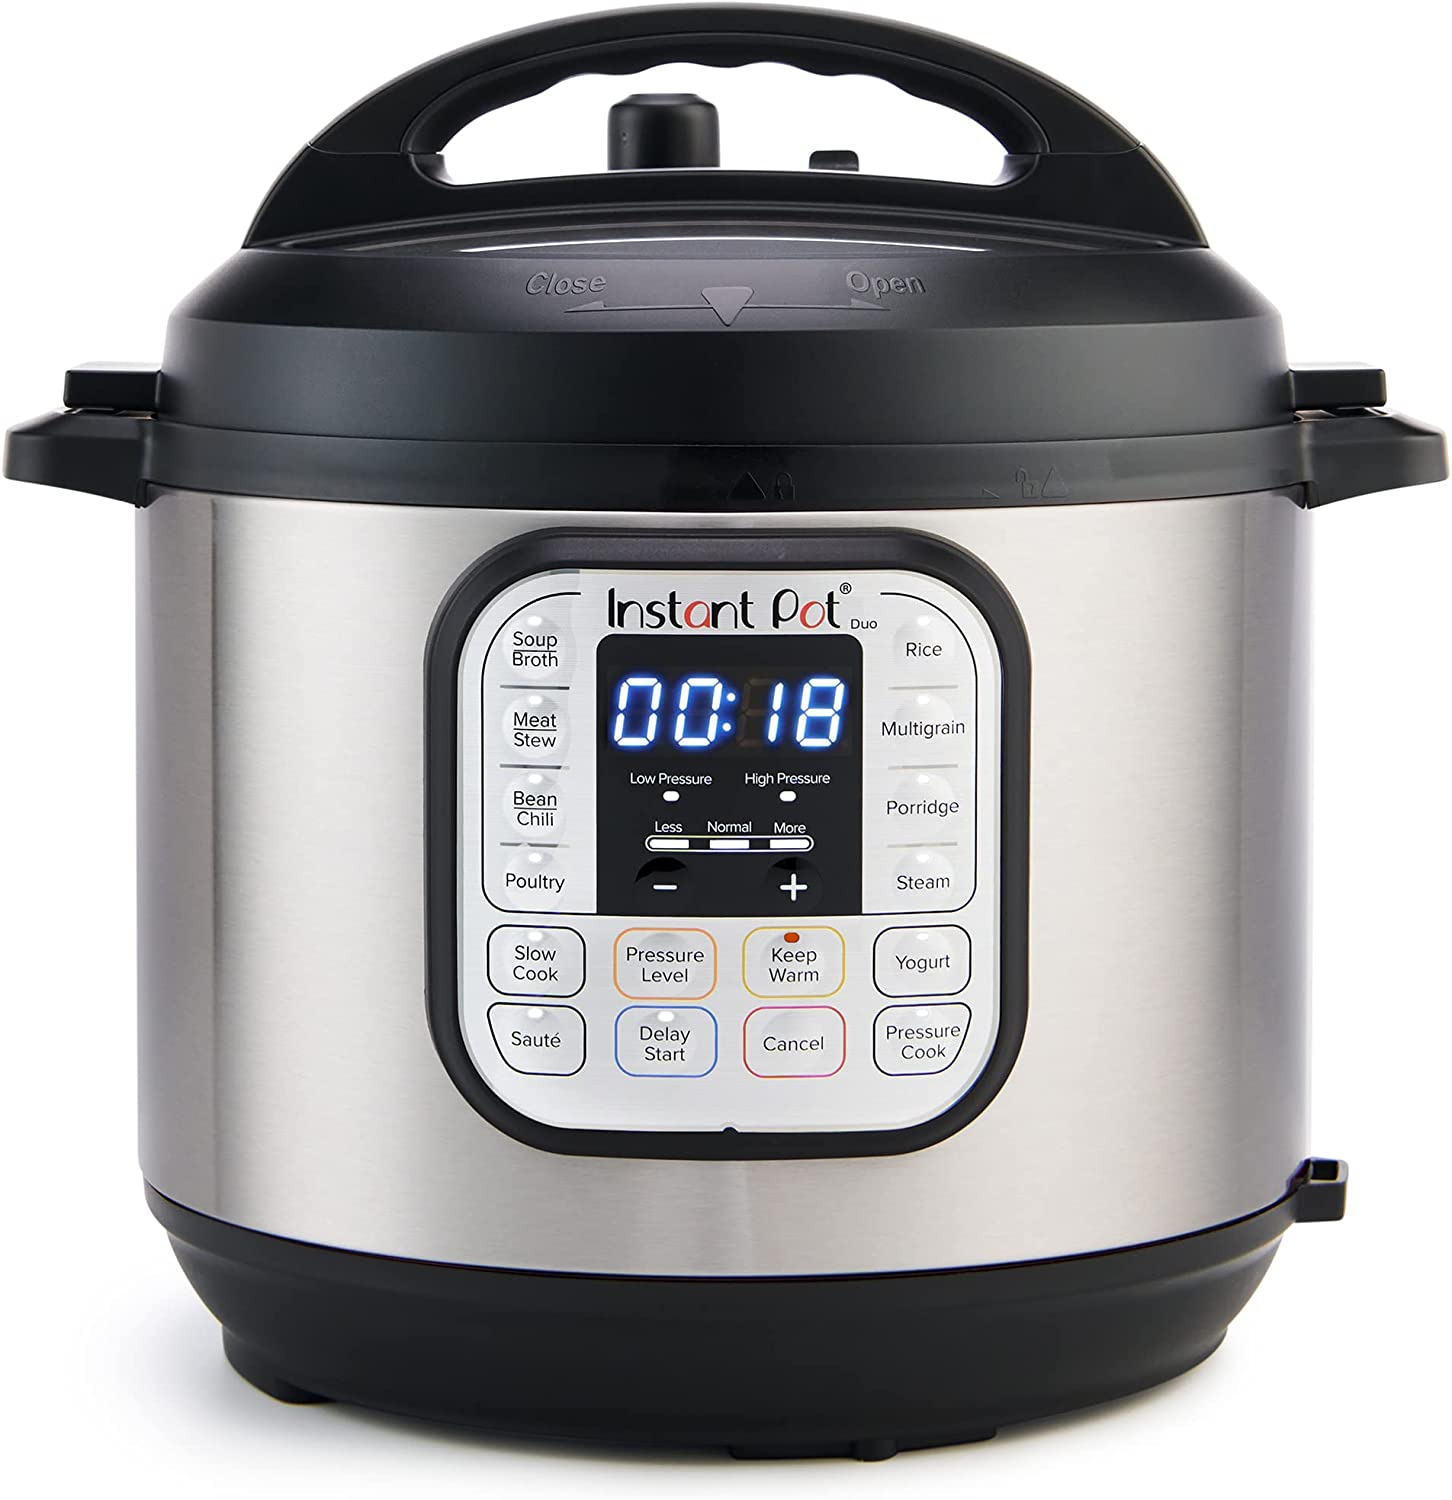 Instant Pot Duo Stainless Steel 7-in-1 Electric Digital Pressure Cooker - 3QT